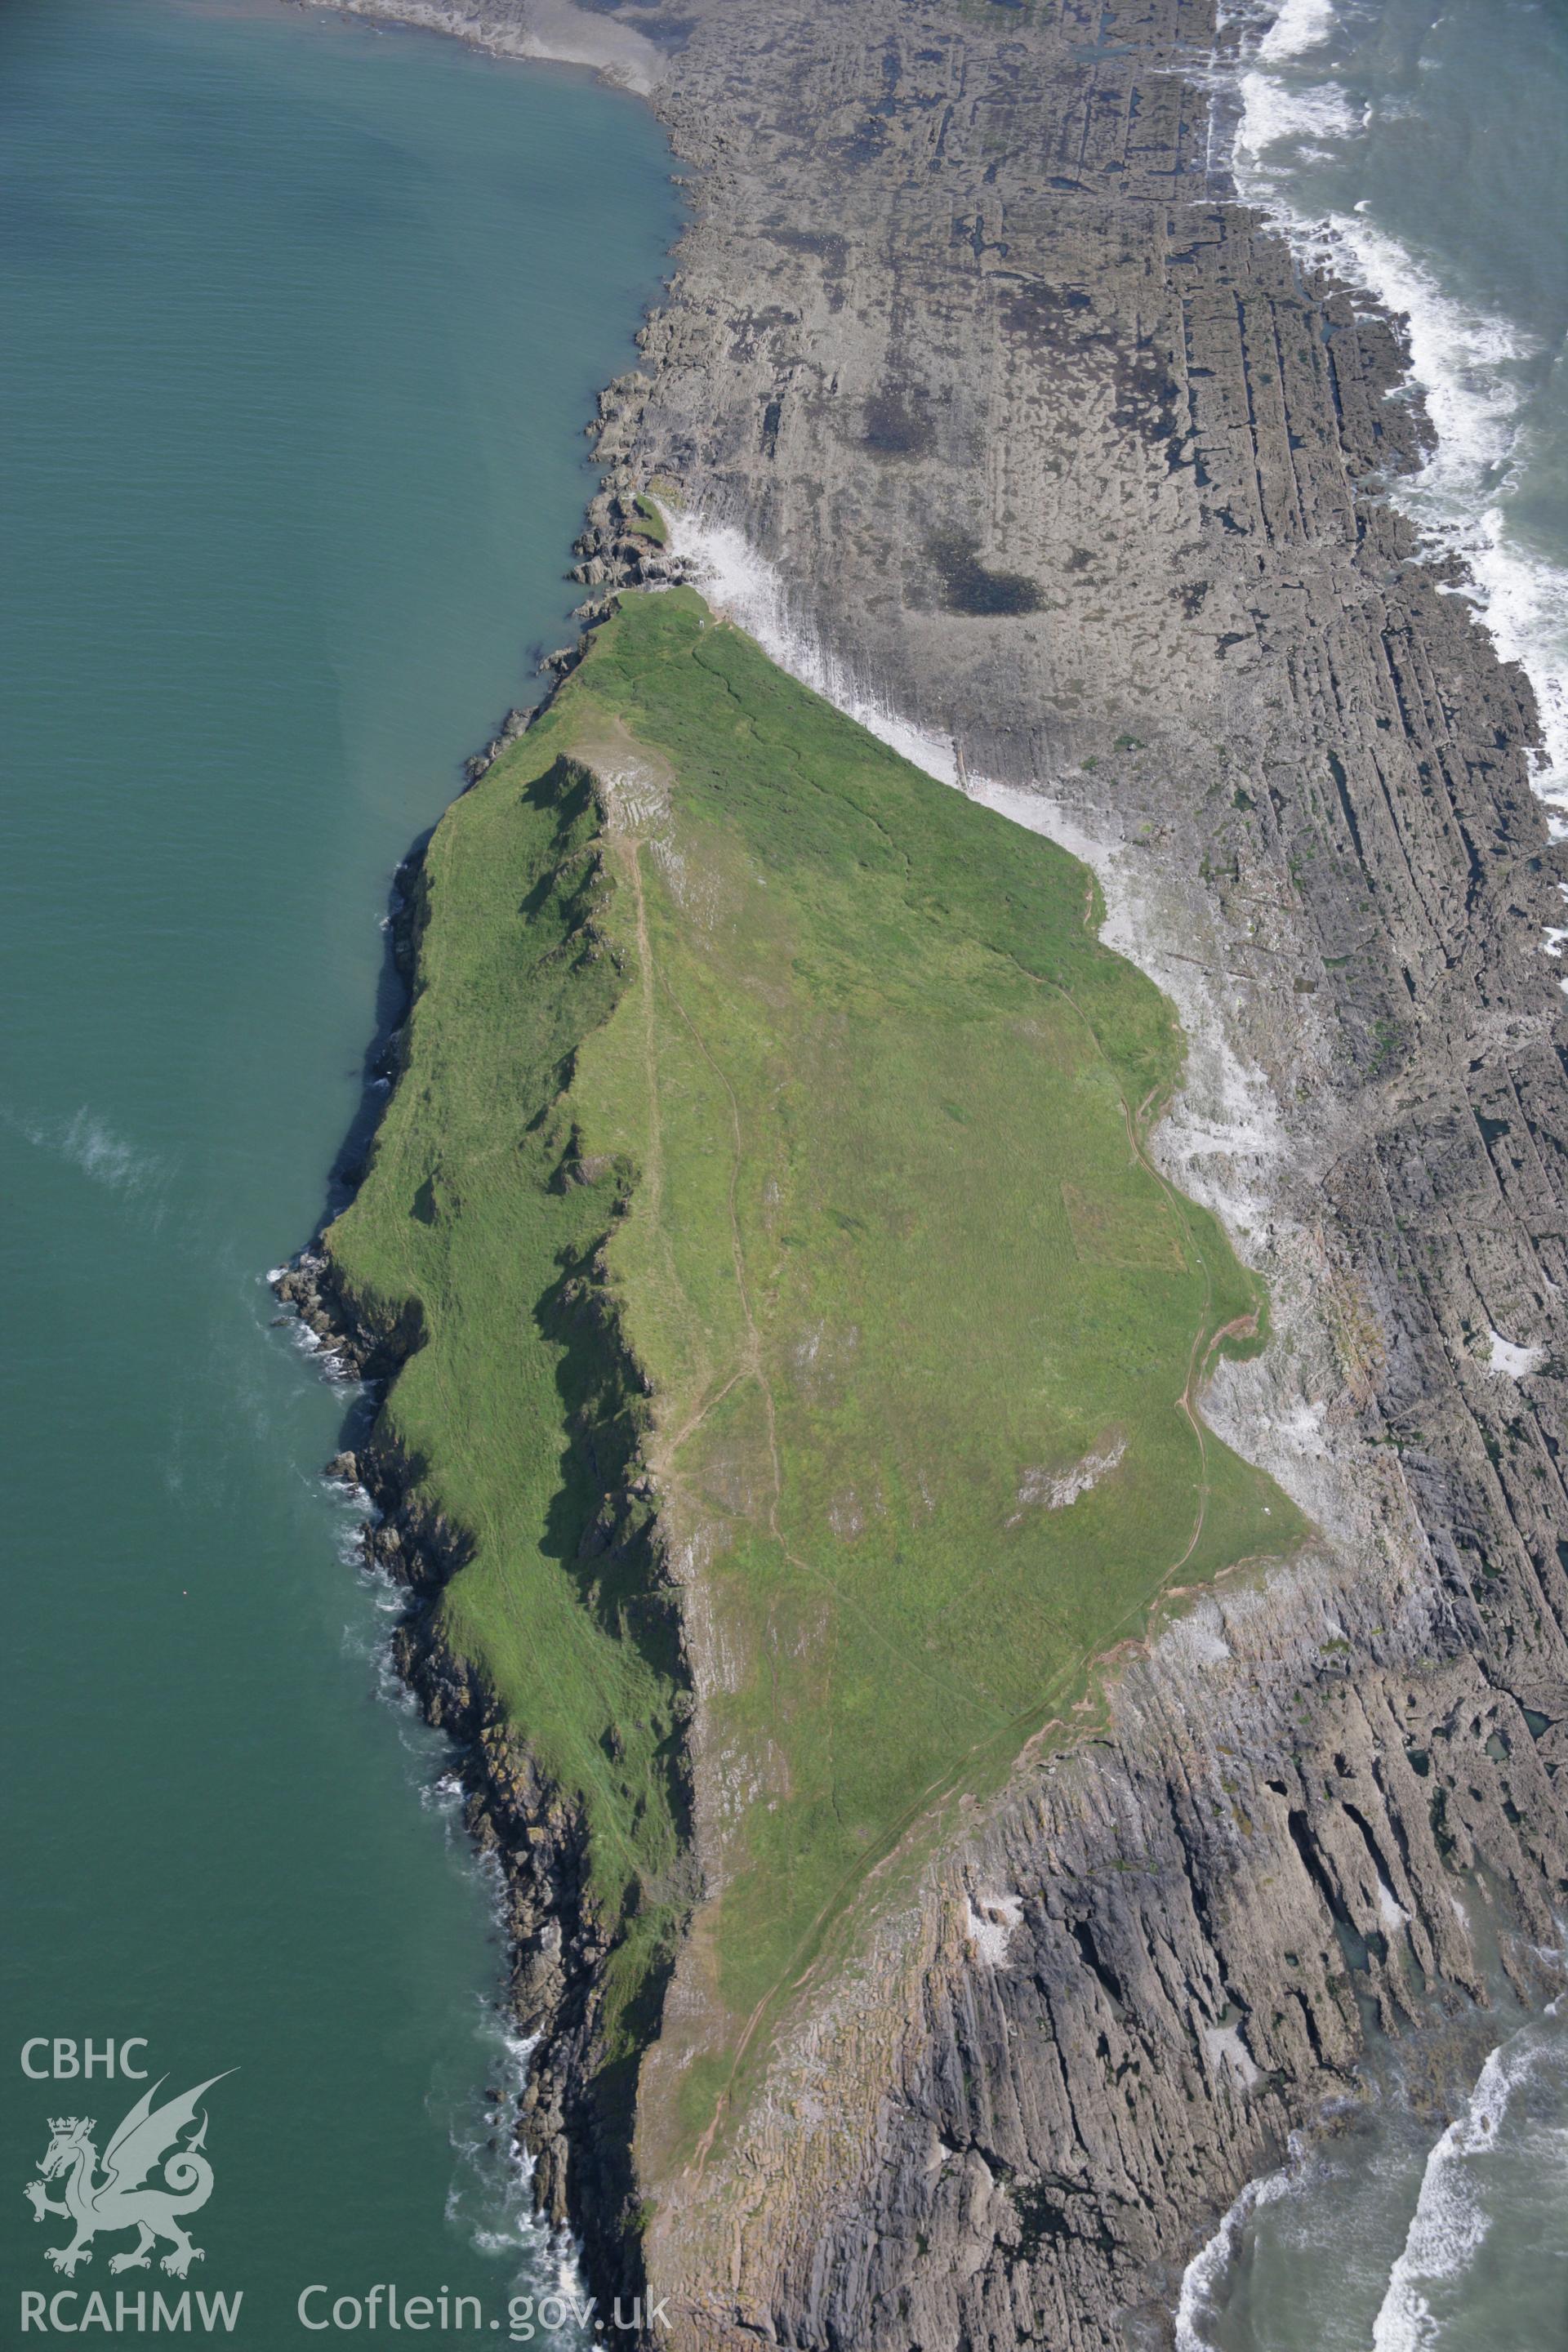 RCAHMW colour oblique aerial photograph of Worms Head and the defended enclosure. Taken on 11 July 2006 by Toby Driver.